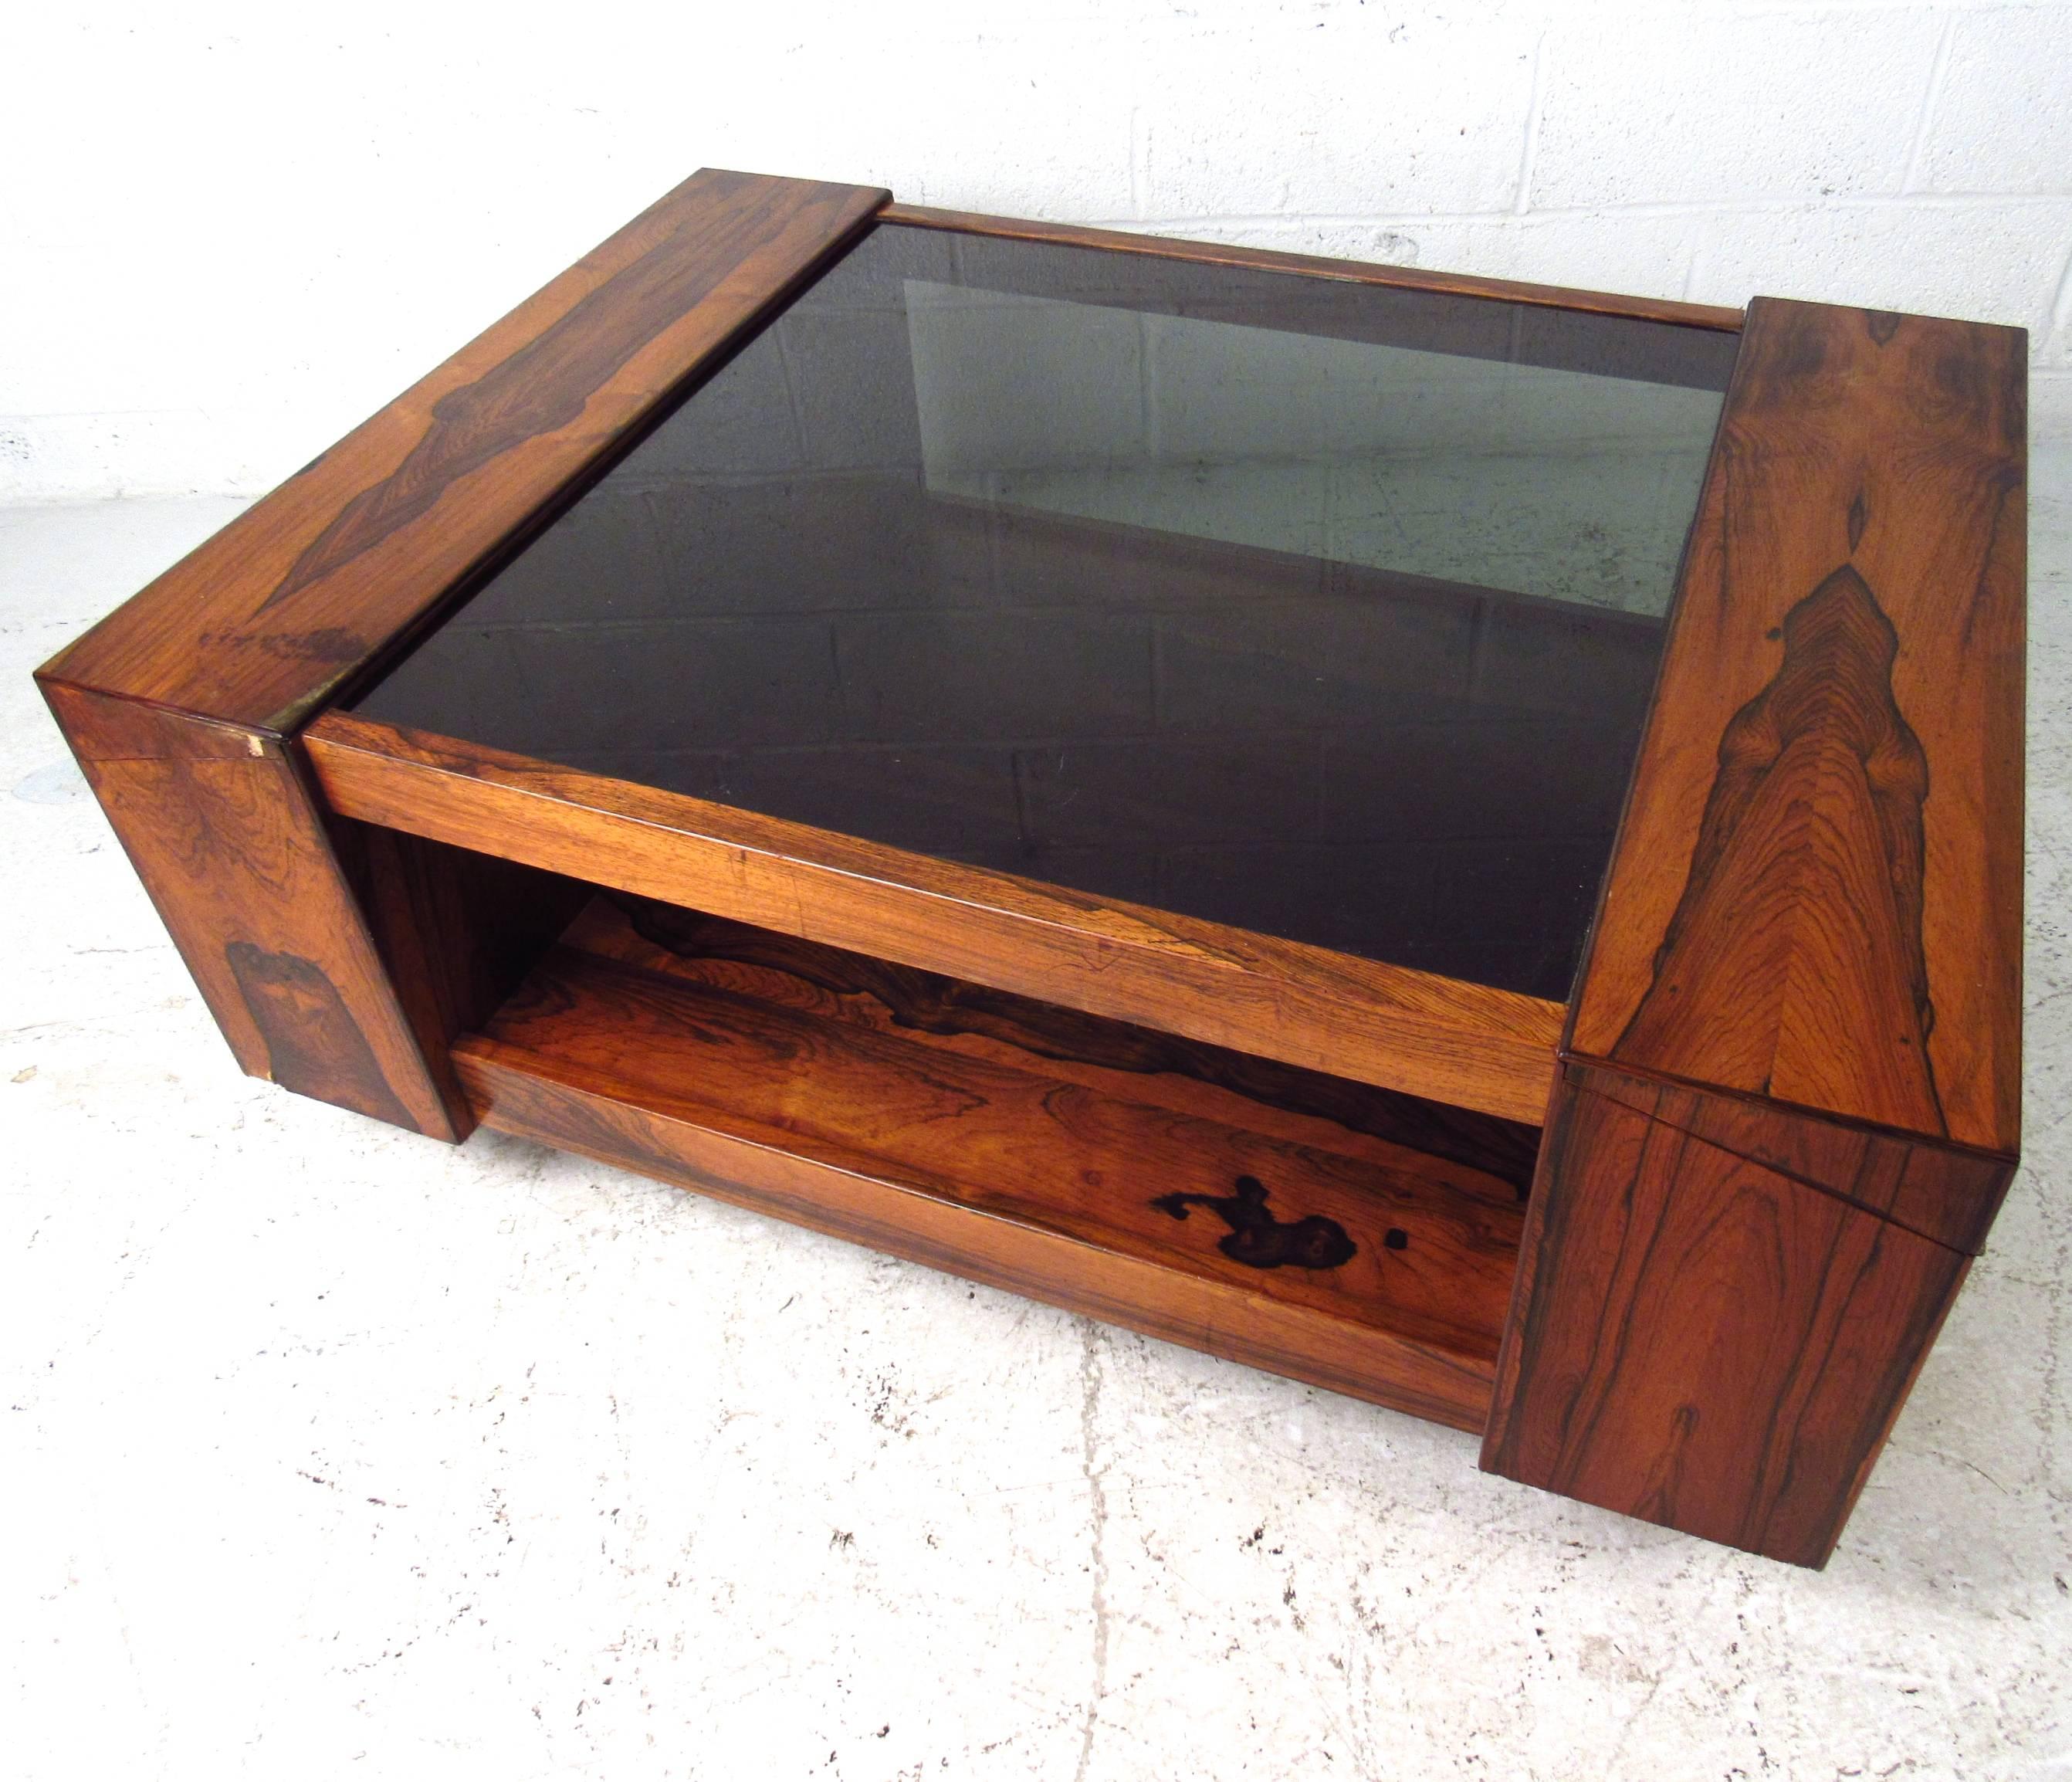 This unique smoked glass coffee table features hideaway storage, vintage rosewood finish, and unique chrome feet. This substantial table is the perfect addition to any interior. Please confirm item location (NY or NJ).